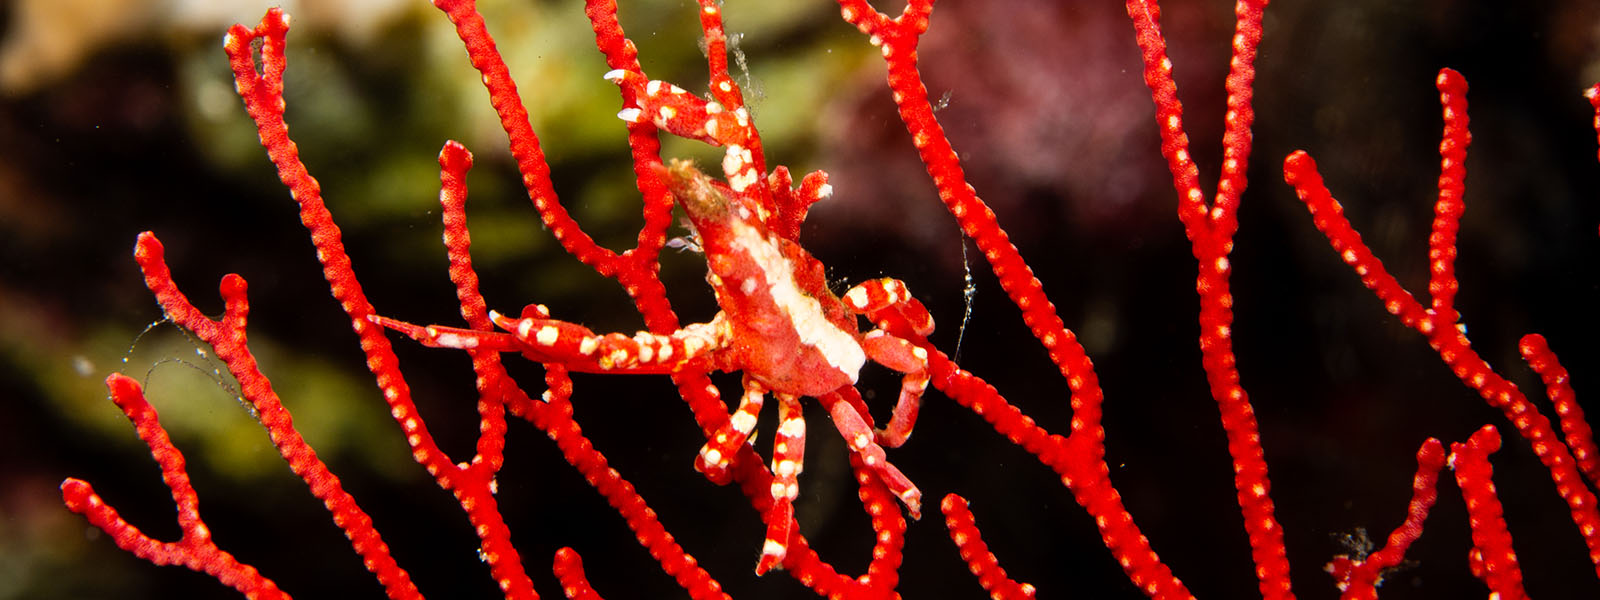 Spider crabs are some of the marine life we see on our snorkeling tour to Kimbe Bay, Papua New Guinea